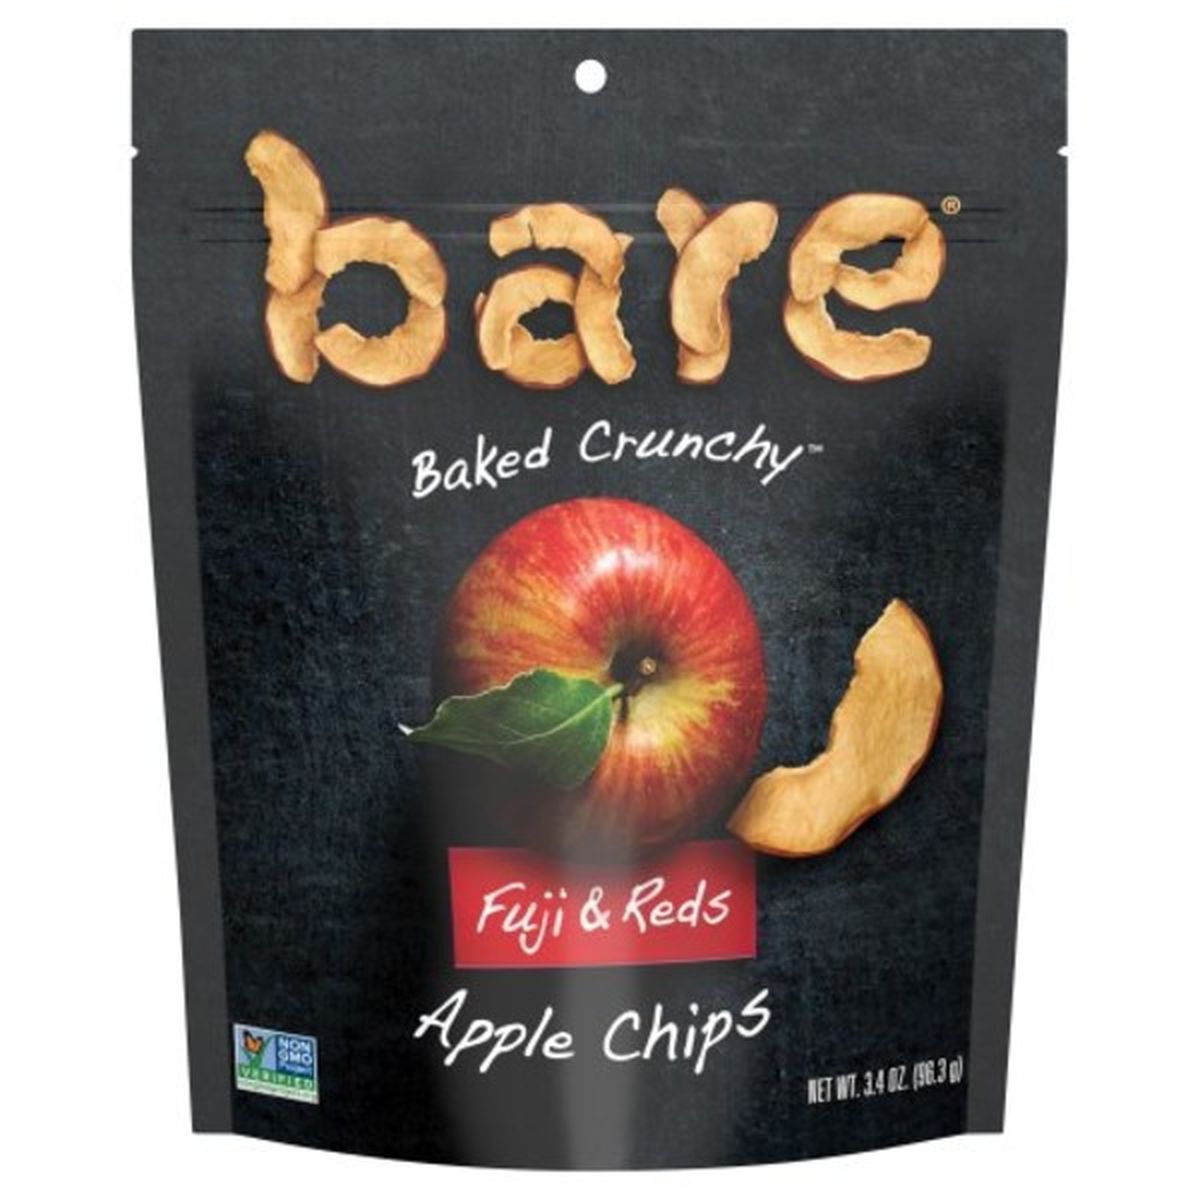 Calories in Bare Baked Crunchy Apple Chips, Fuji & Reds